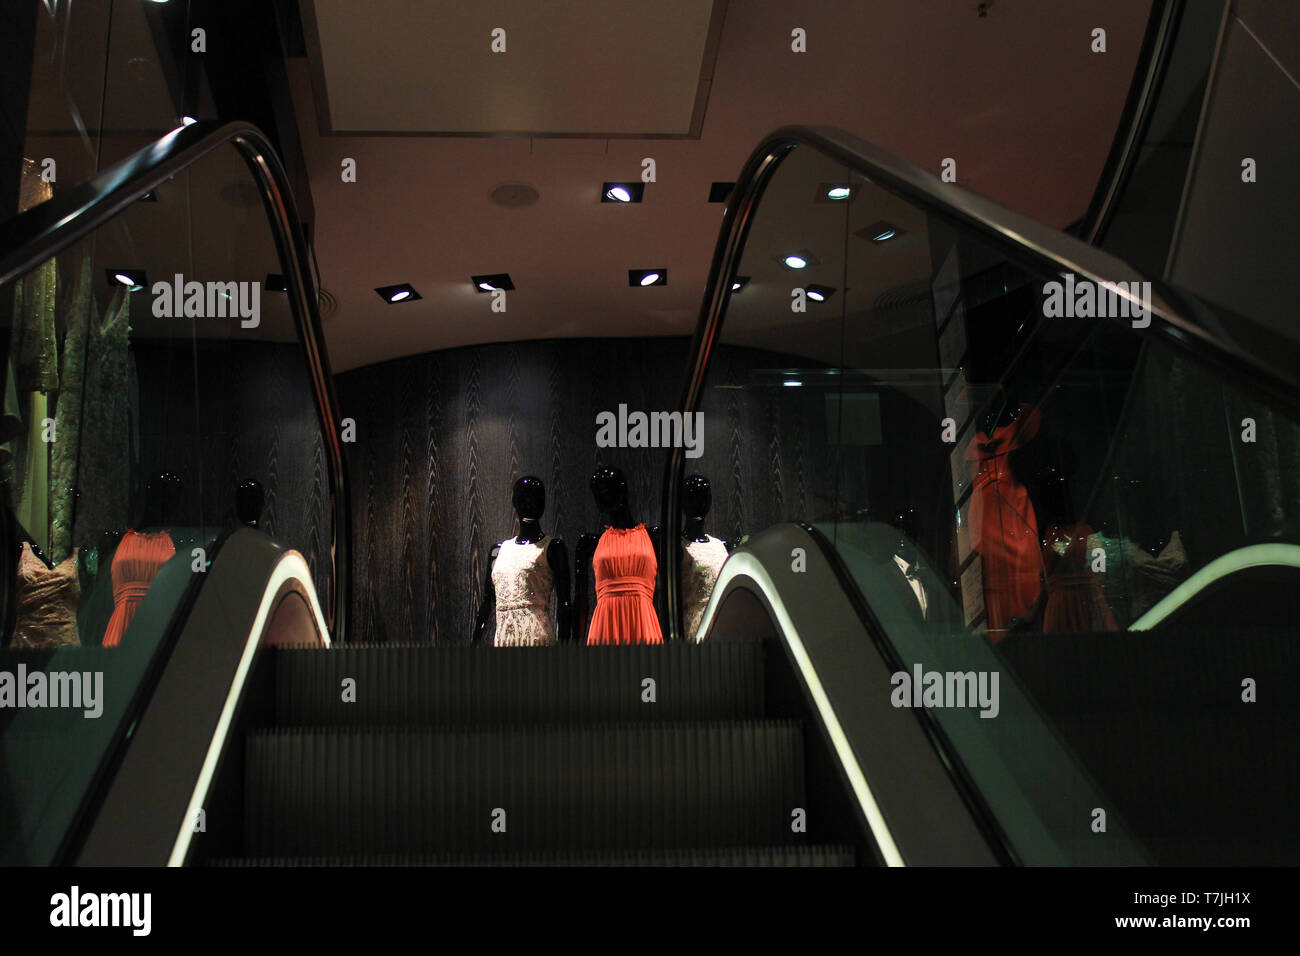 Luxury shopping:, symbold picture, display dummys, expensive fashion behind moving staircase. Stock Photo